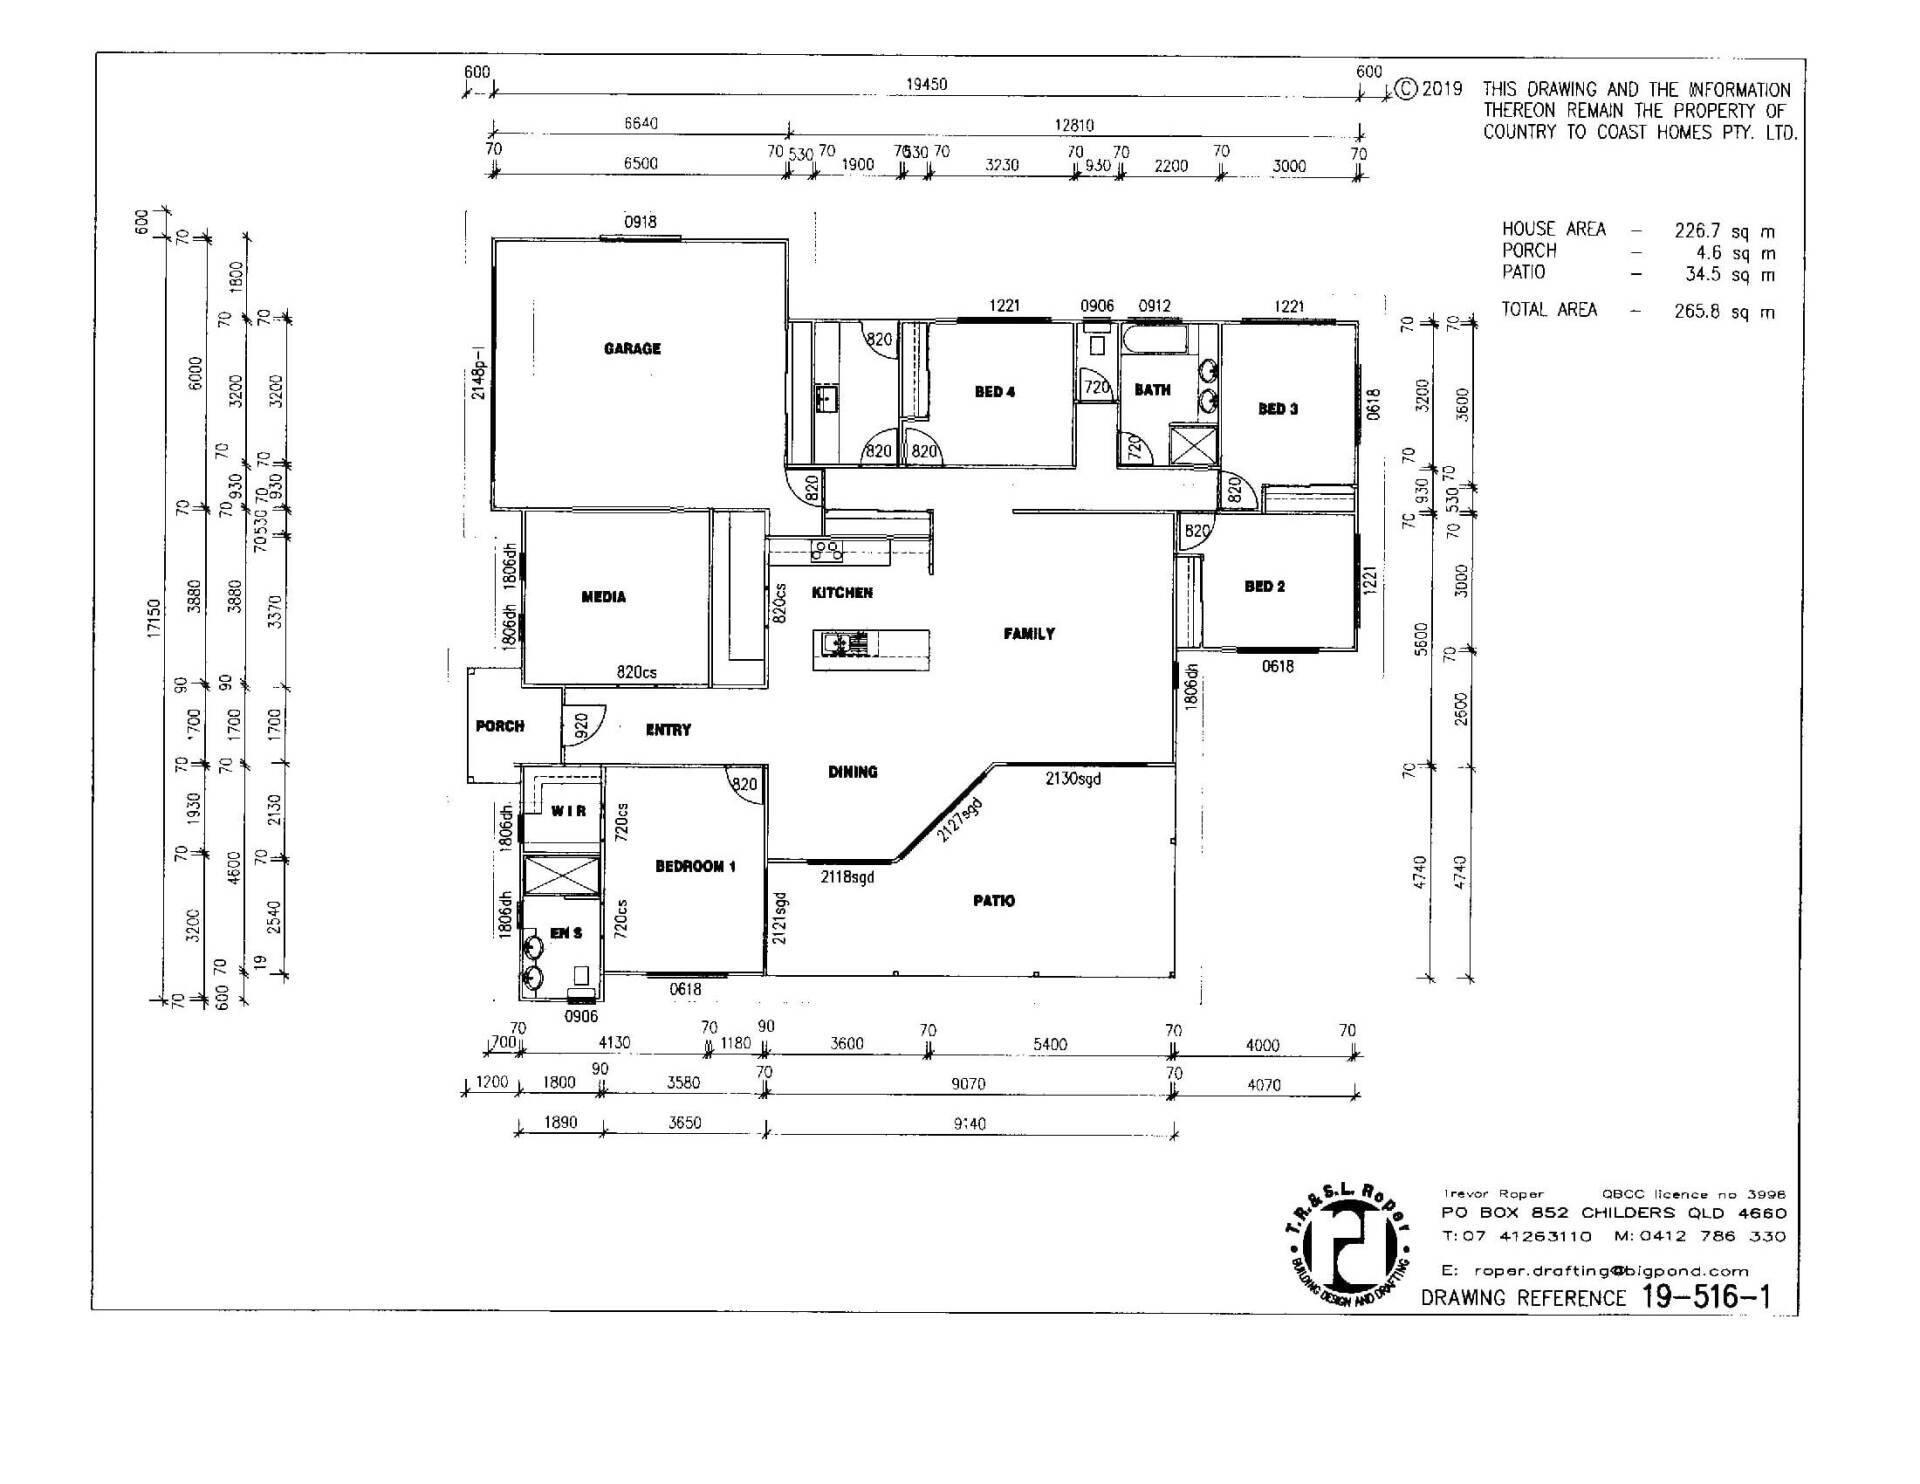 Many Rooms House Plan — Country to Coast Homes in Logging Creek Rd, QLD